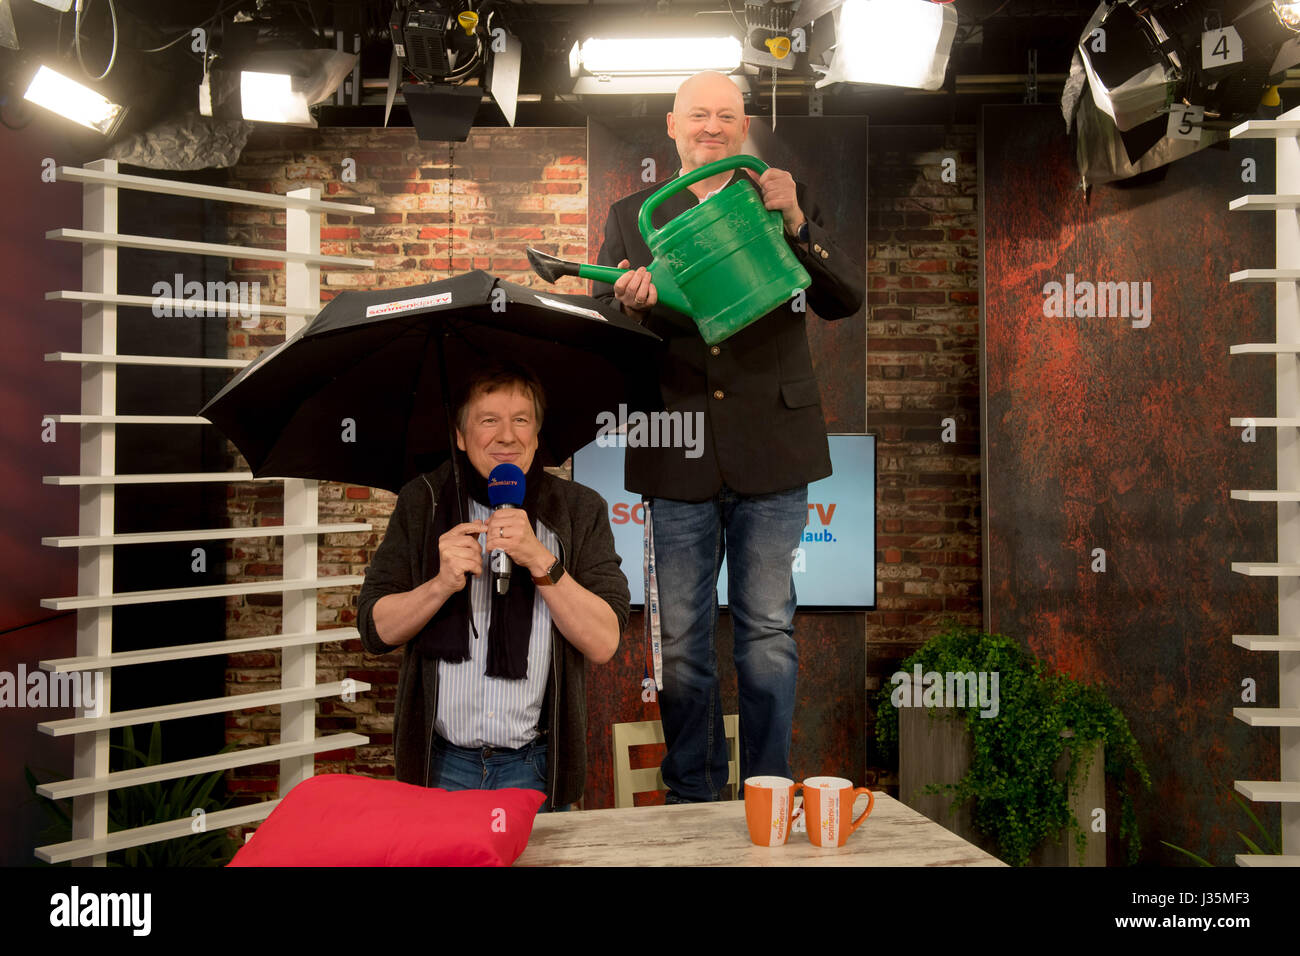 Munich, Germany. 03rd May, 2017. Andreas Lambeck (R), CEO of the sonnenklar.TV TV station, uses a watering can to pour water on the head of meteorologist Jorg Kachelmann at the TV studio of the sonnenklar.TV station in Munich, Germany, 03 May 2017. On 04 May Kachelmann will present the 'Kachelmannwetter' show, which will air once monthly. Photo: Tobias Hase/dpa/Alamy Live News Stock Photo